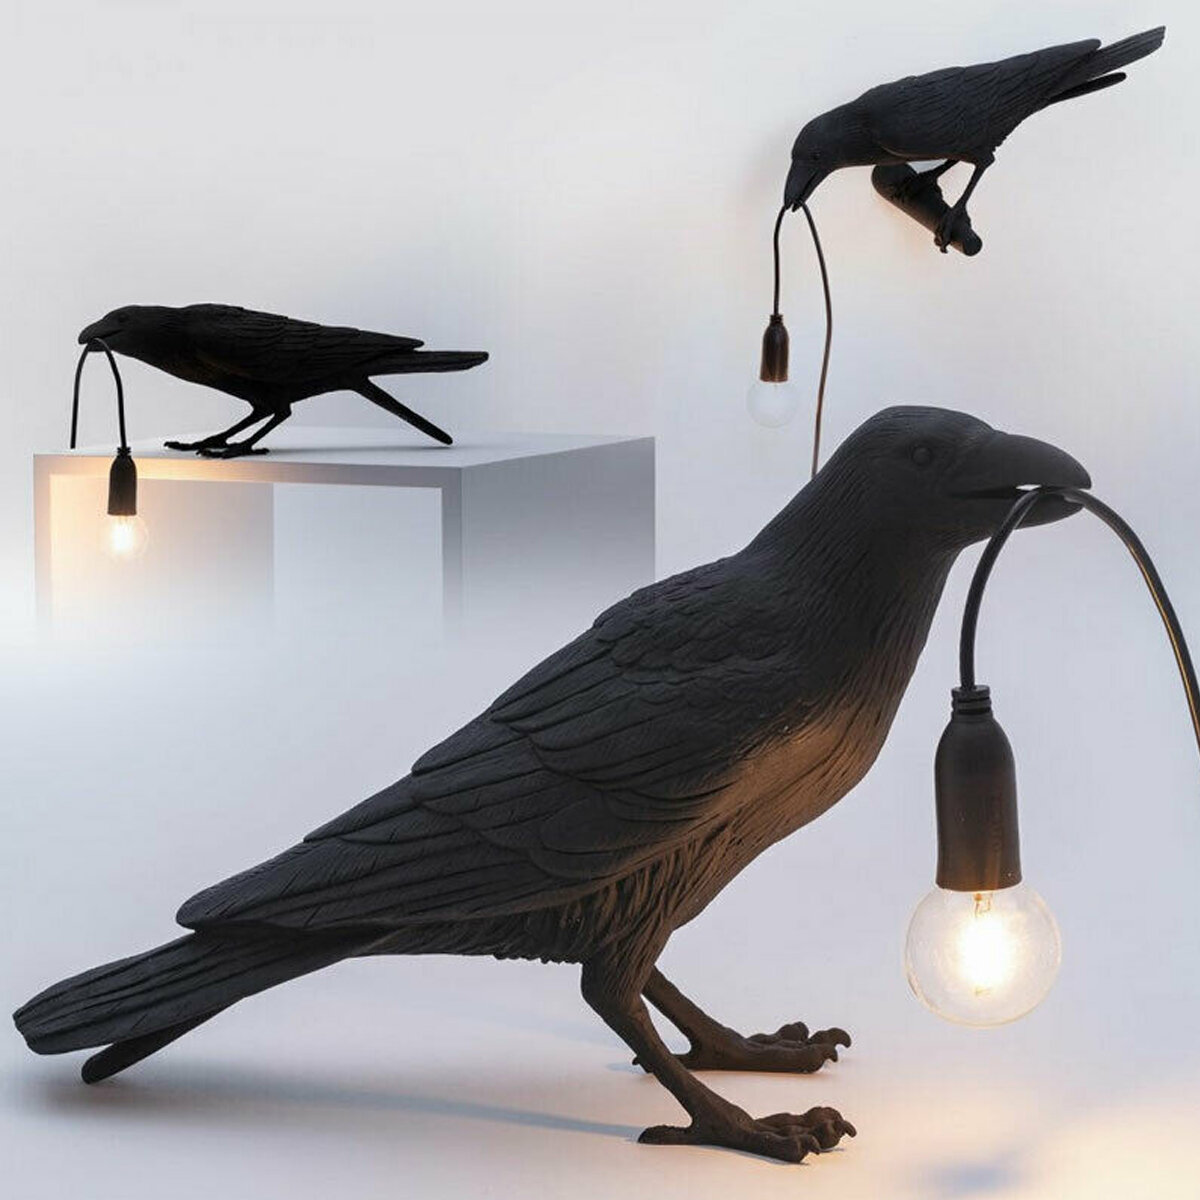 Image of Black/White Bird Table Lamps Resin Crow Desk Lamp Bedroom Wall Sconce Light Fixtures